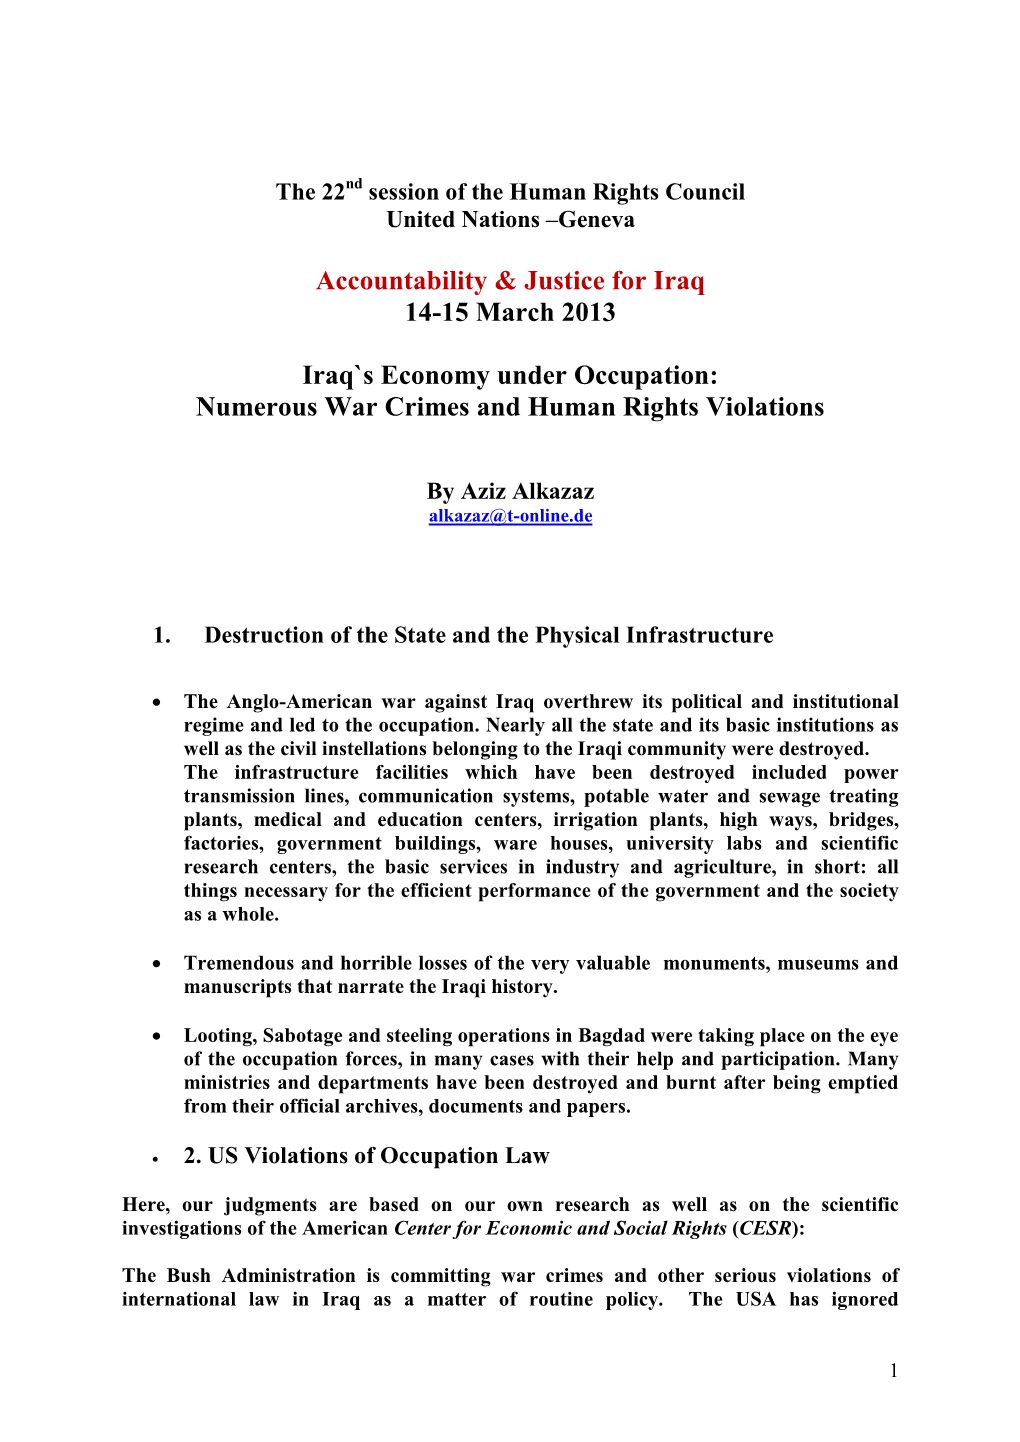 Impact of the Occupation on the Iraqi People and Ecomomy